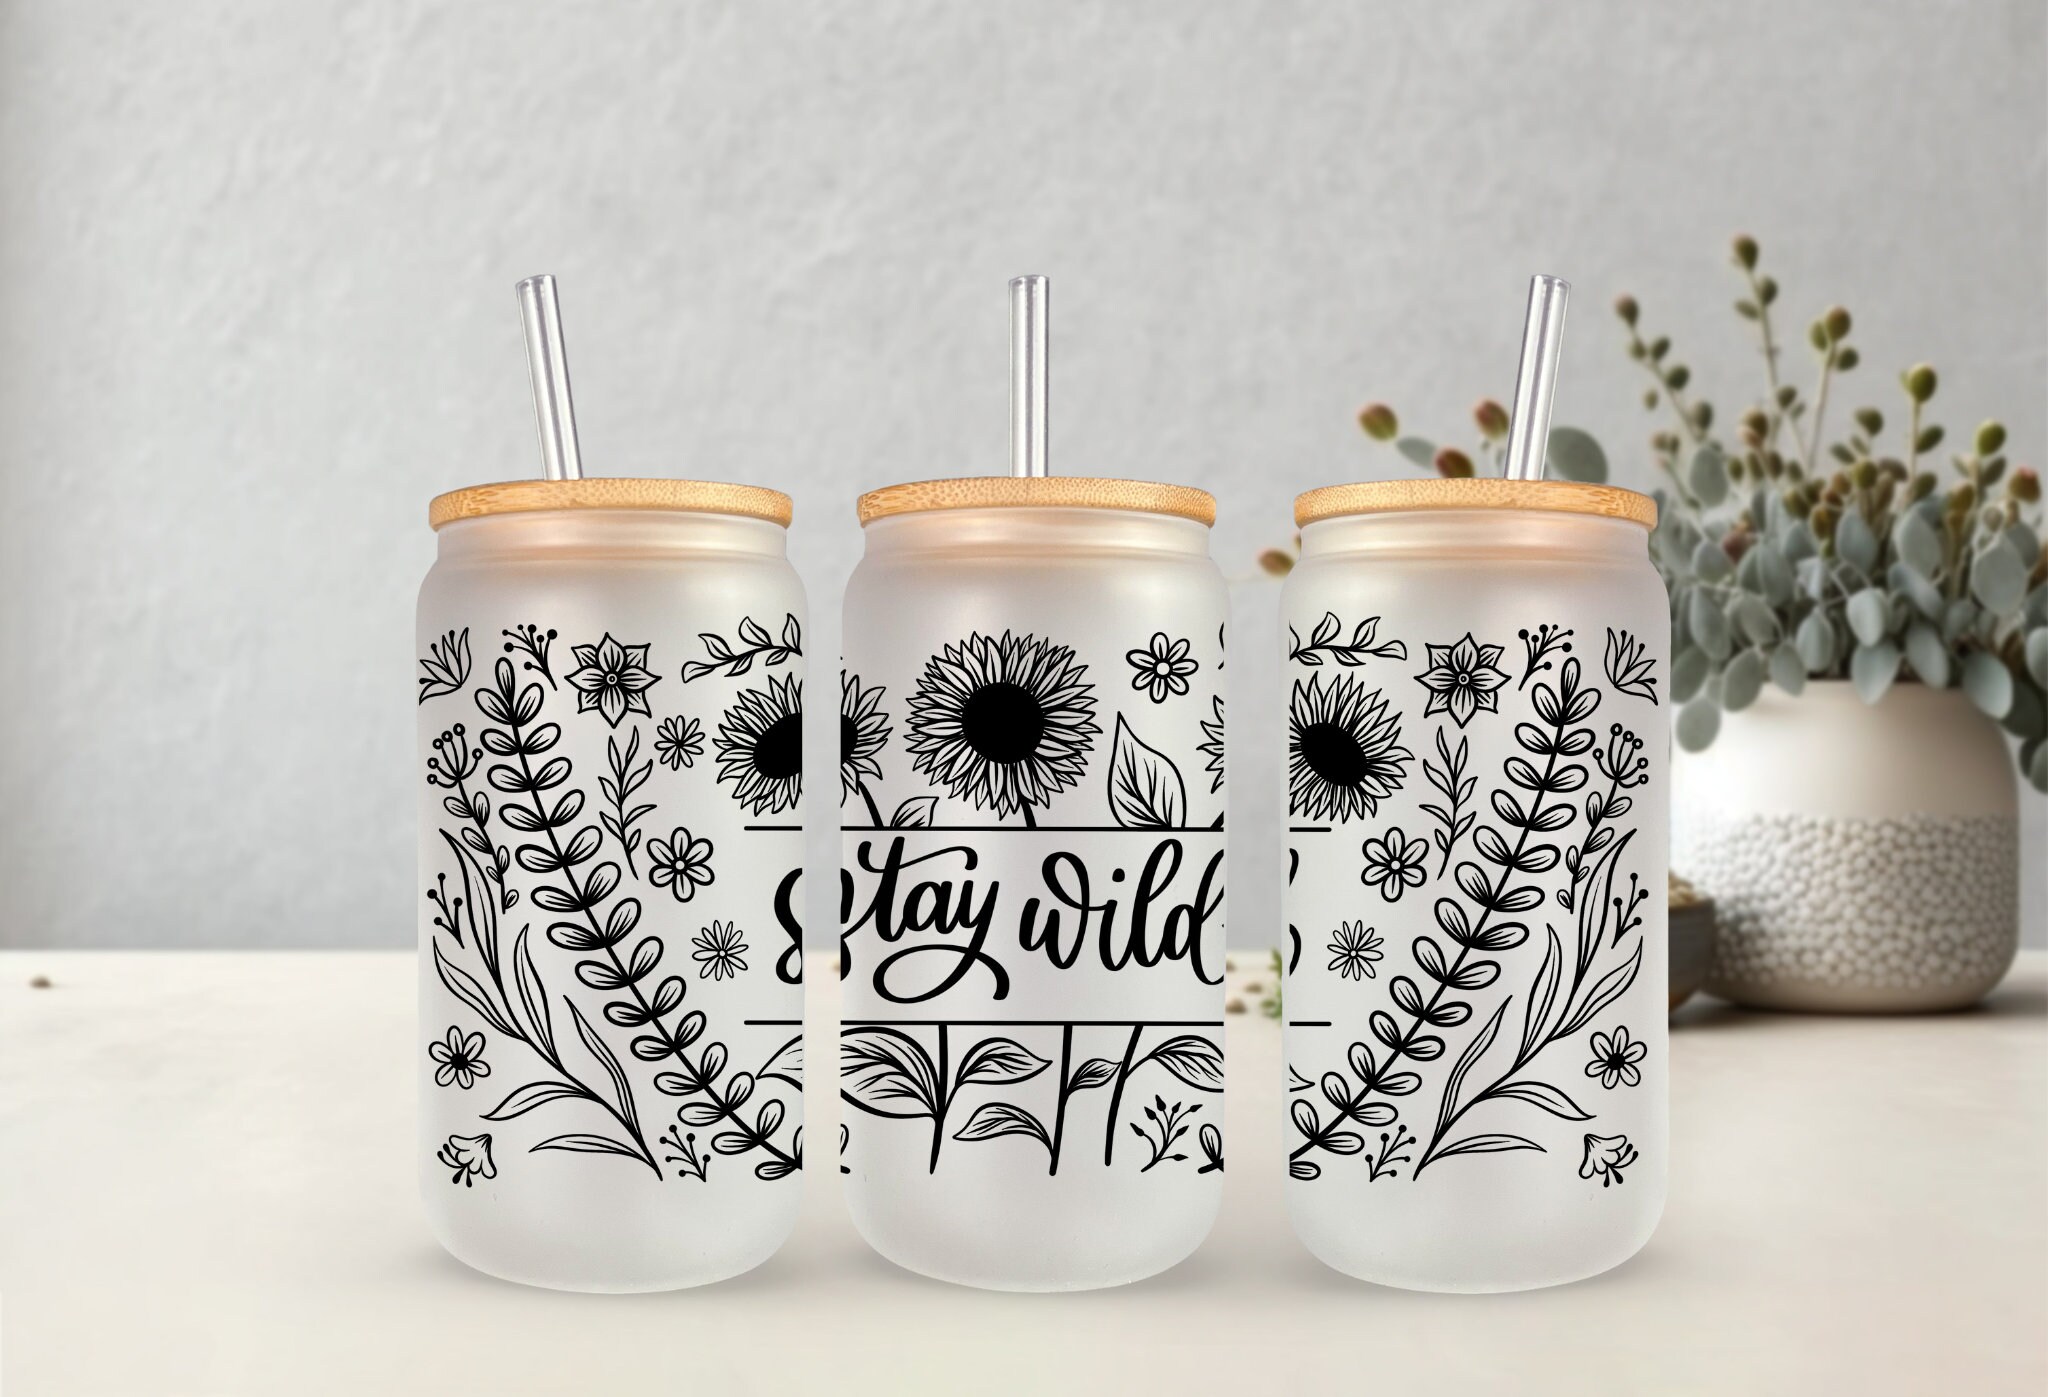 Santa's favorite ho 16oz frosted glass cup, Iced Coffee Cup – Wild Outdoor  Creations